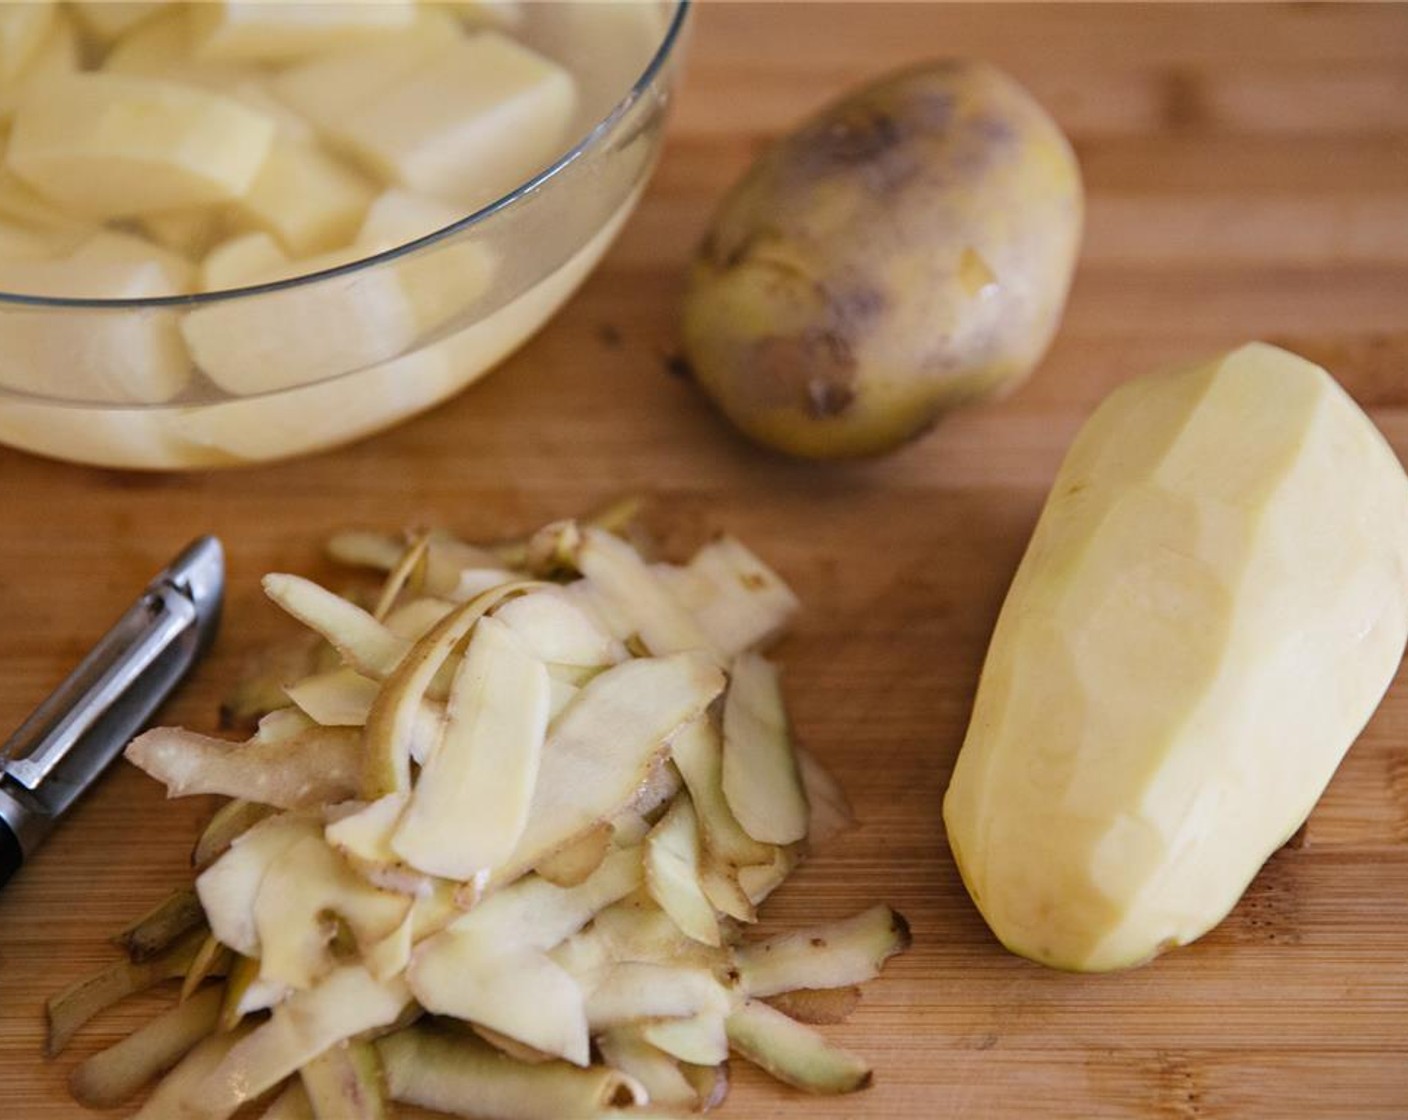 step 1 Wash and peel Potatoes (4) and cut into quarters. Place in a bowl of water and leave to soak for 20 minutes.